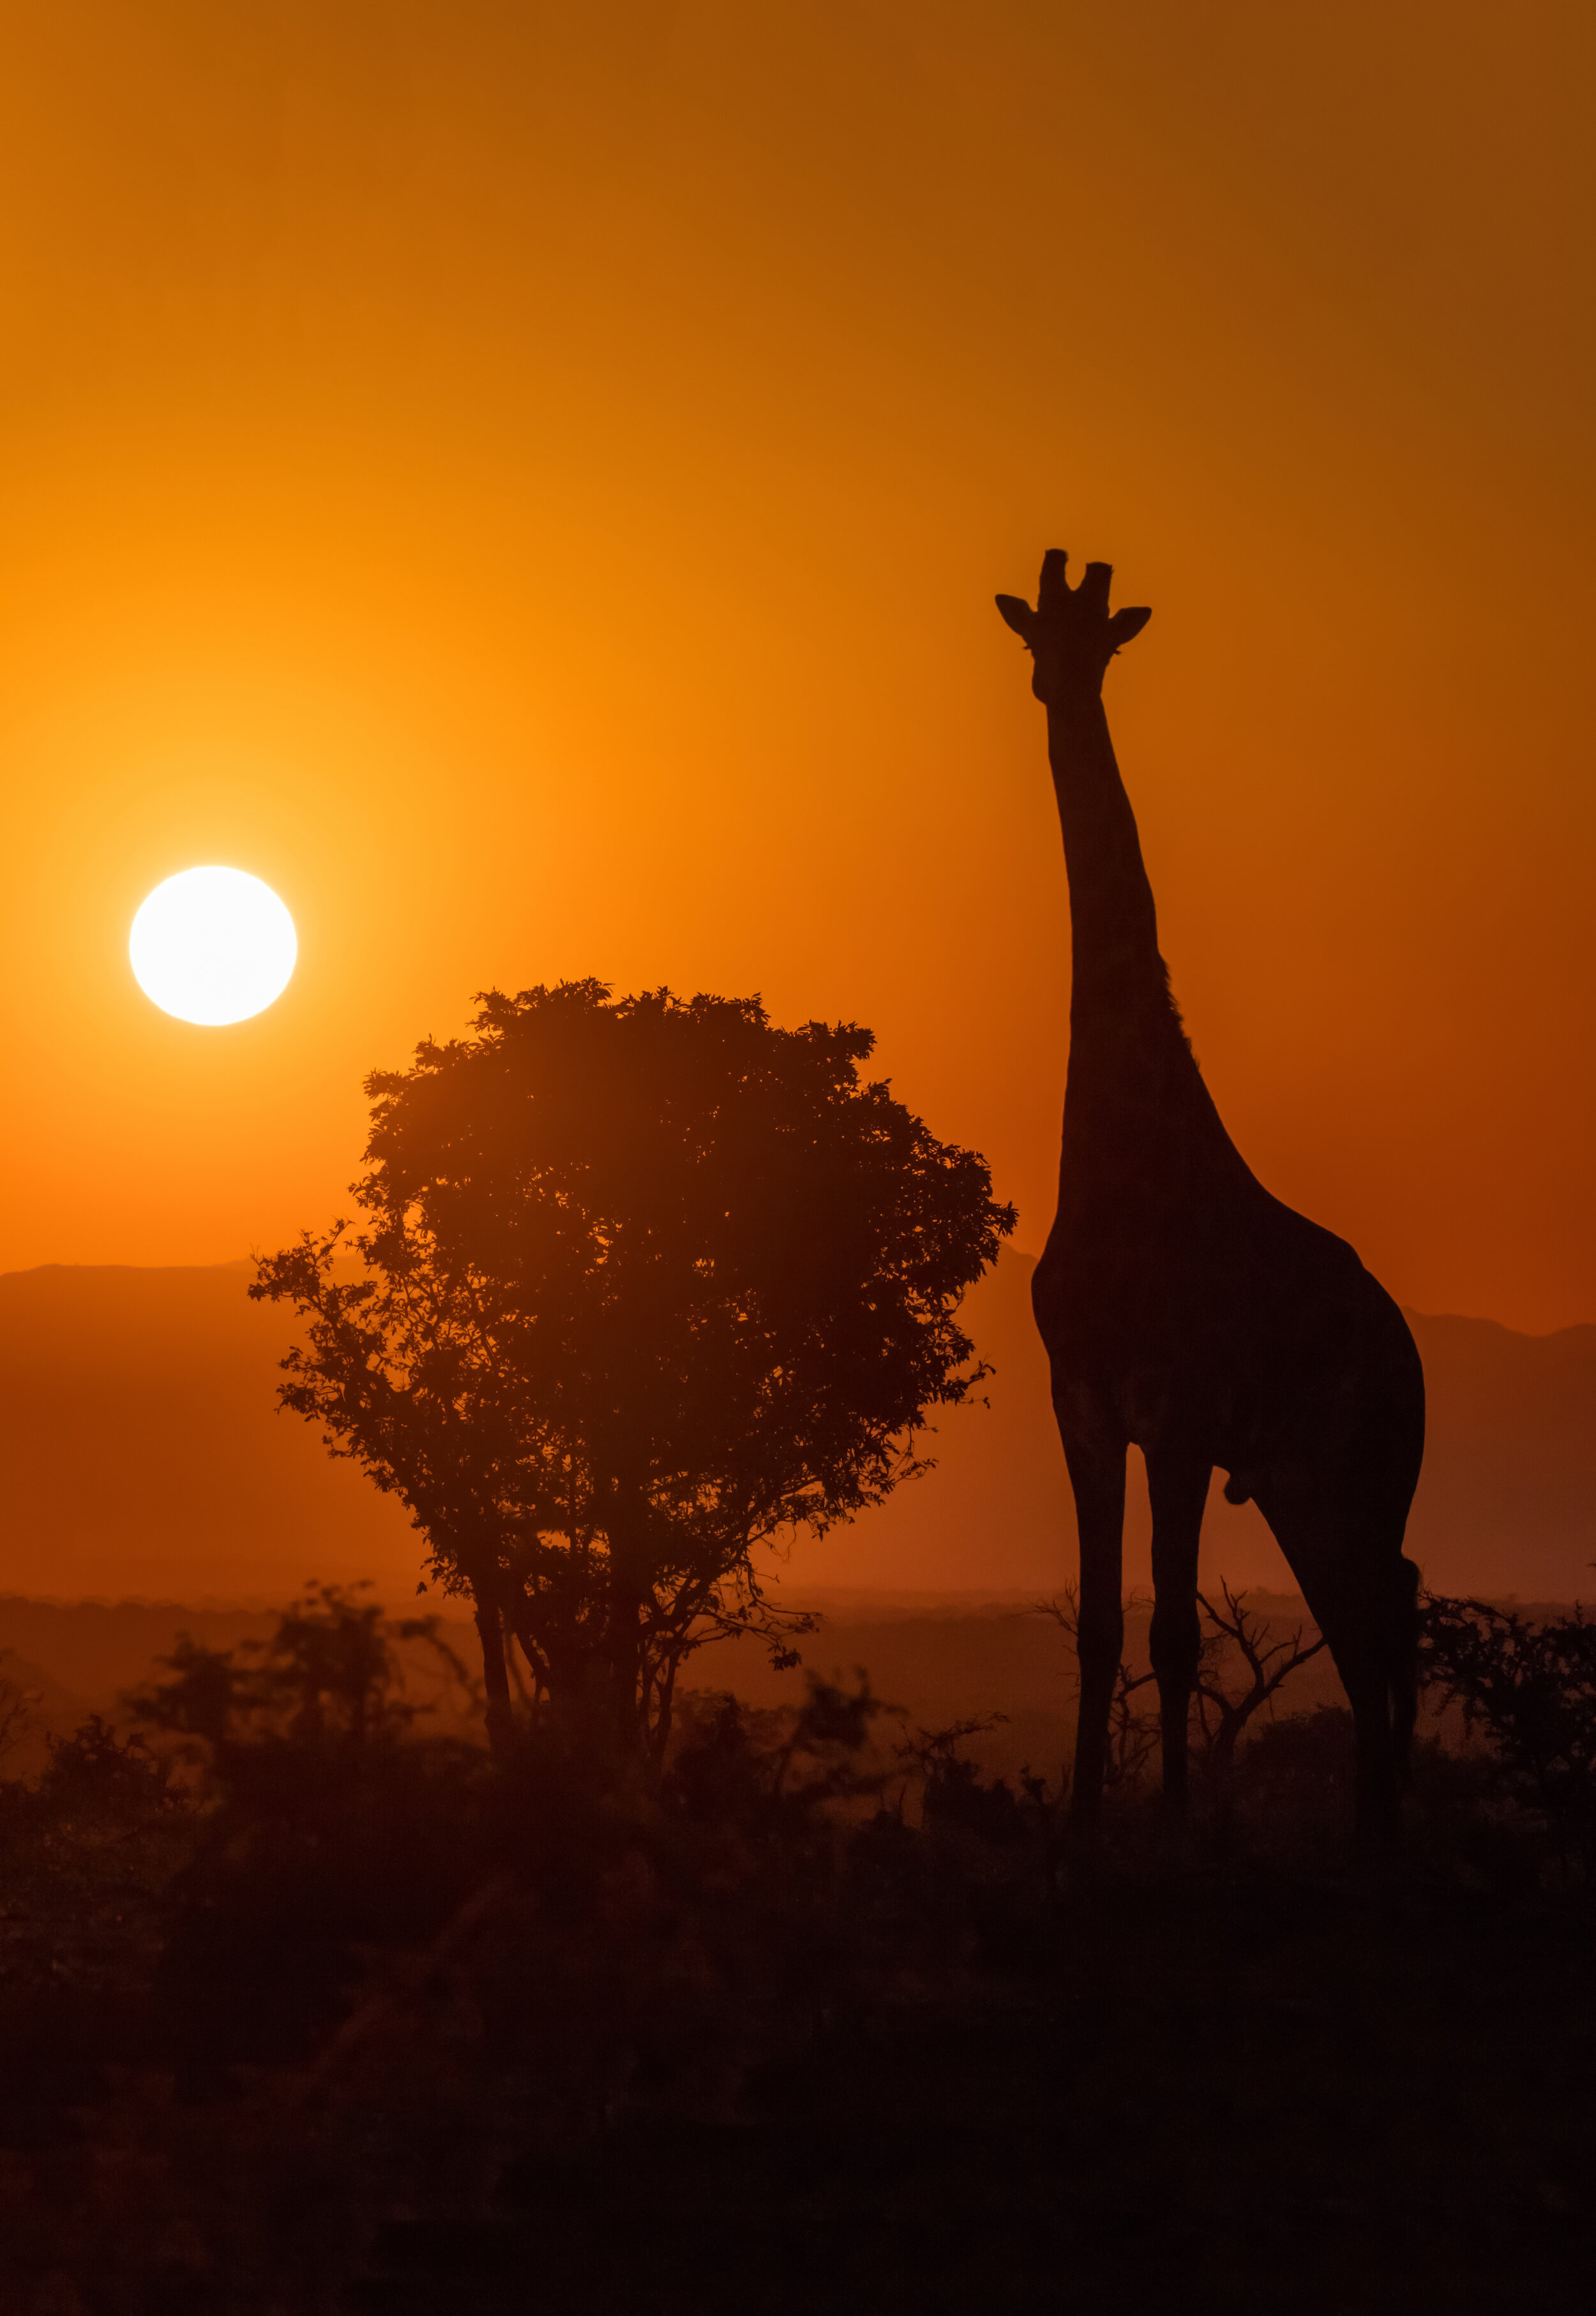 3. End of Day on Safari – South Africa